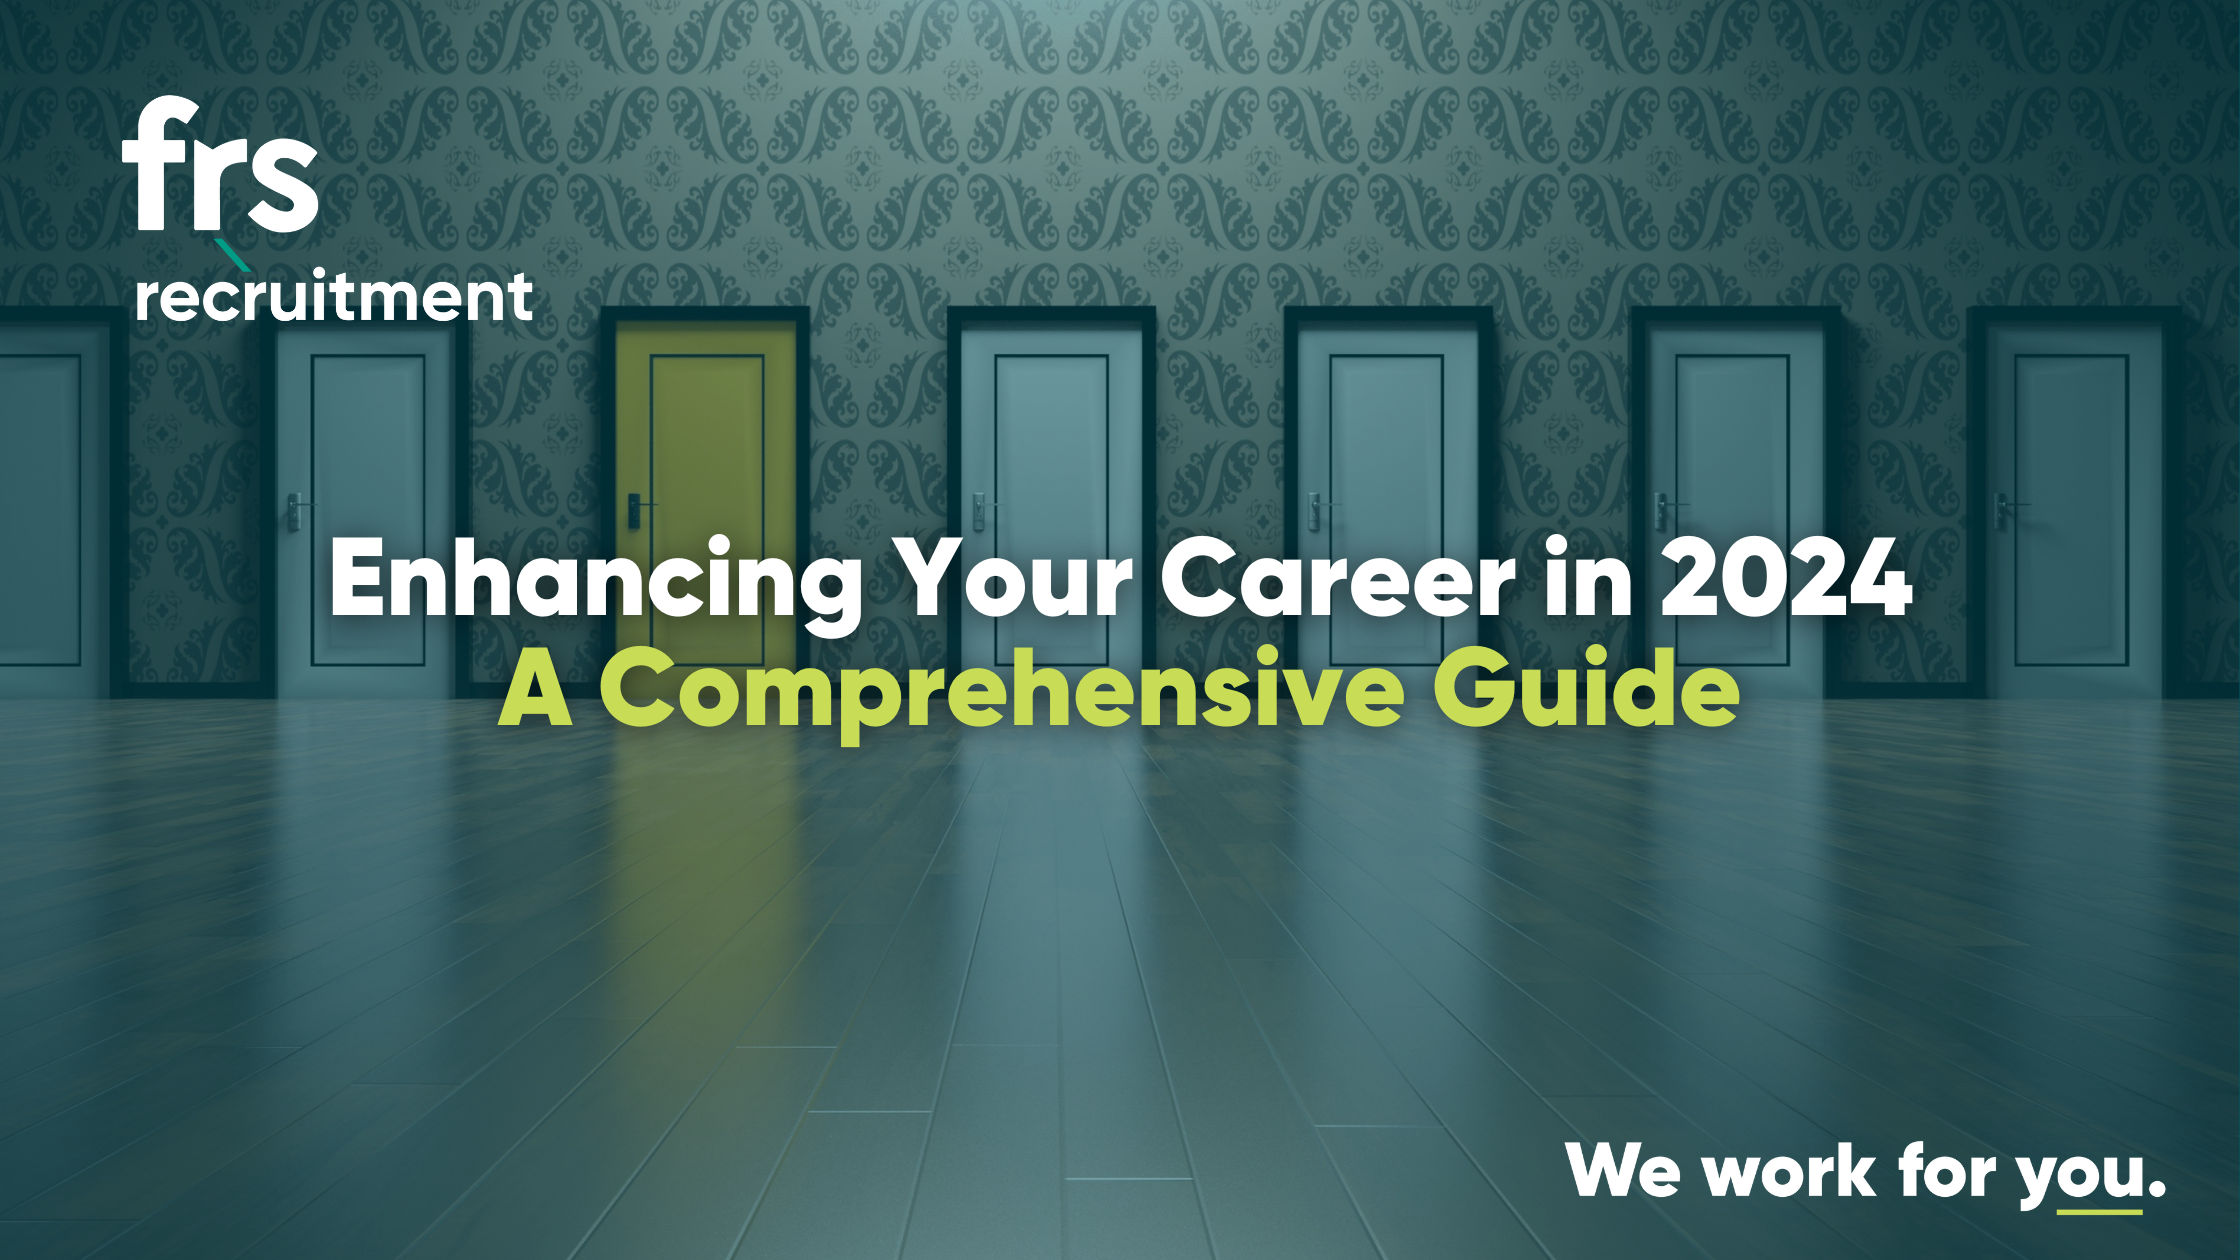 Enhancing Your Career in 2024: A Comprehensive Guide